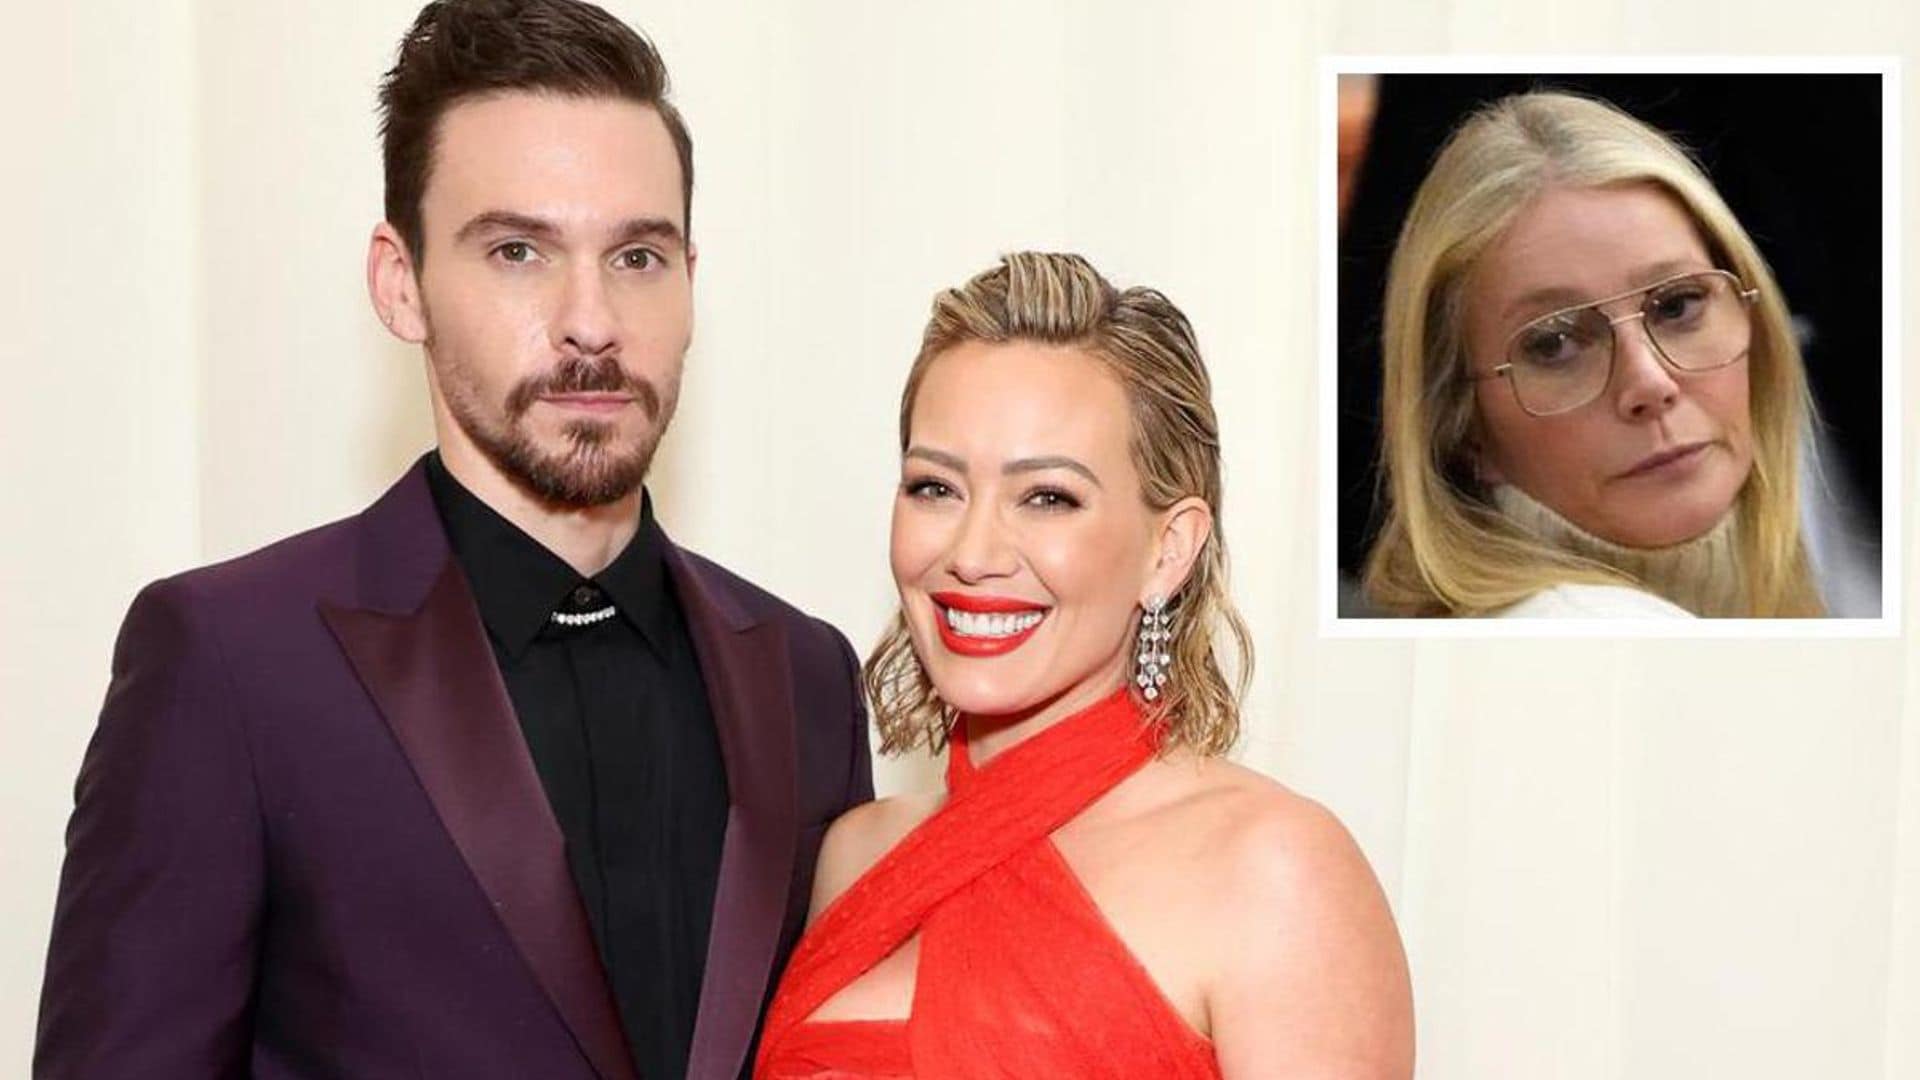 Hilary Duff’s husband Matthew Koma banned from Twitter after impersonating Gwyneth Paltrow